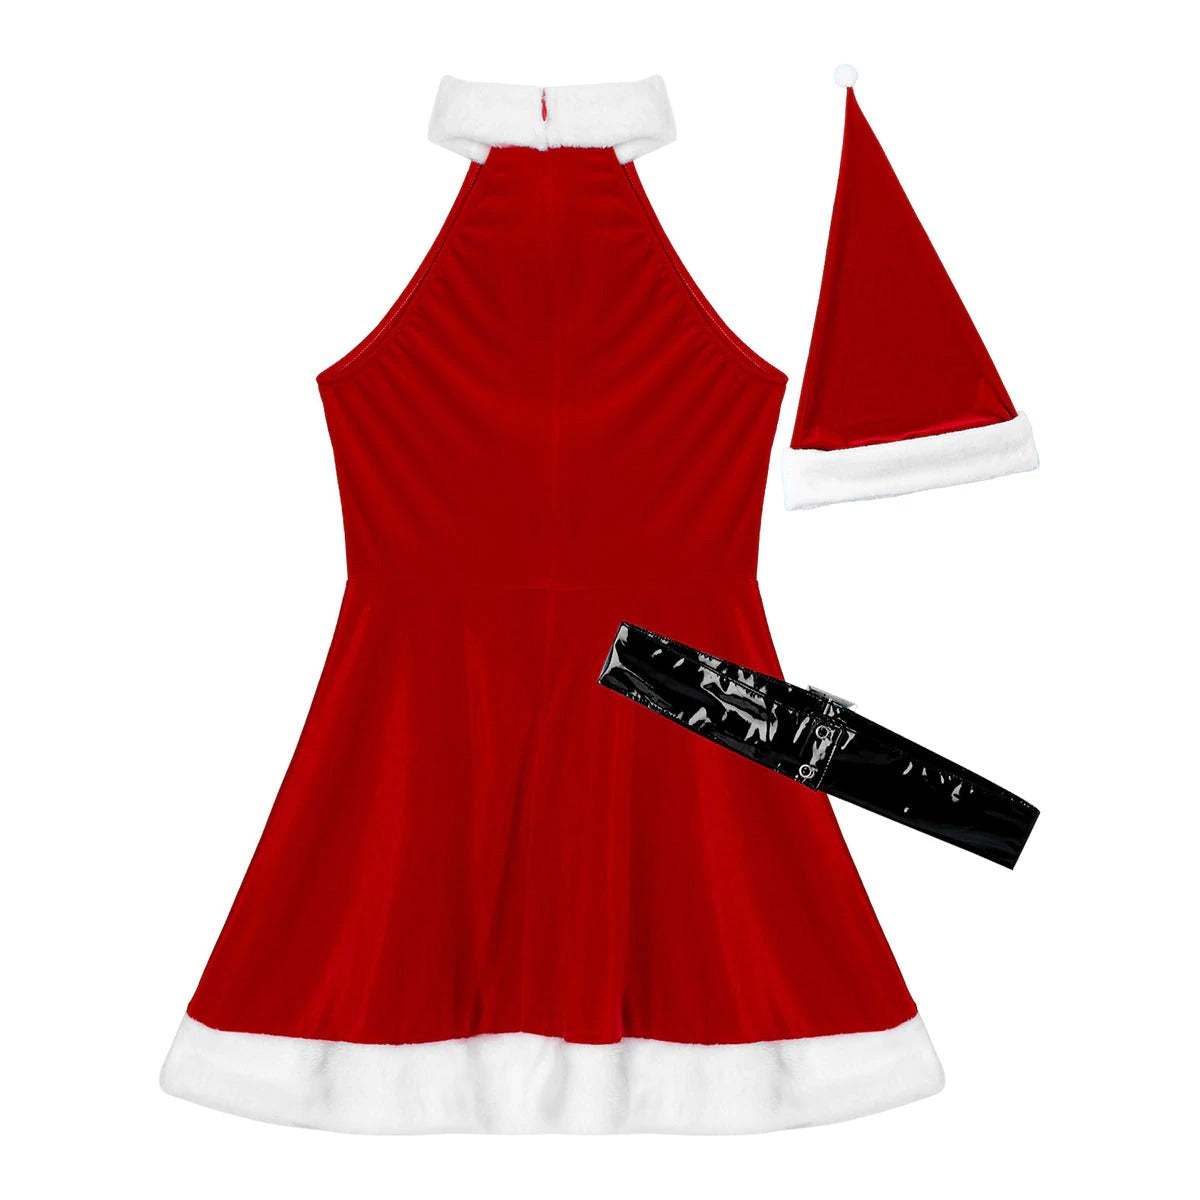 Santa Xmas Women's Cosplay Costume / Fashion Party Dress with Hat and Belt for Dress Up - HARD'N'HEAVY